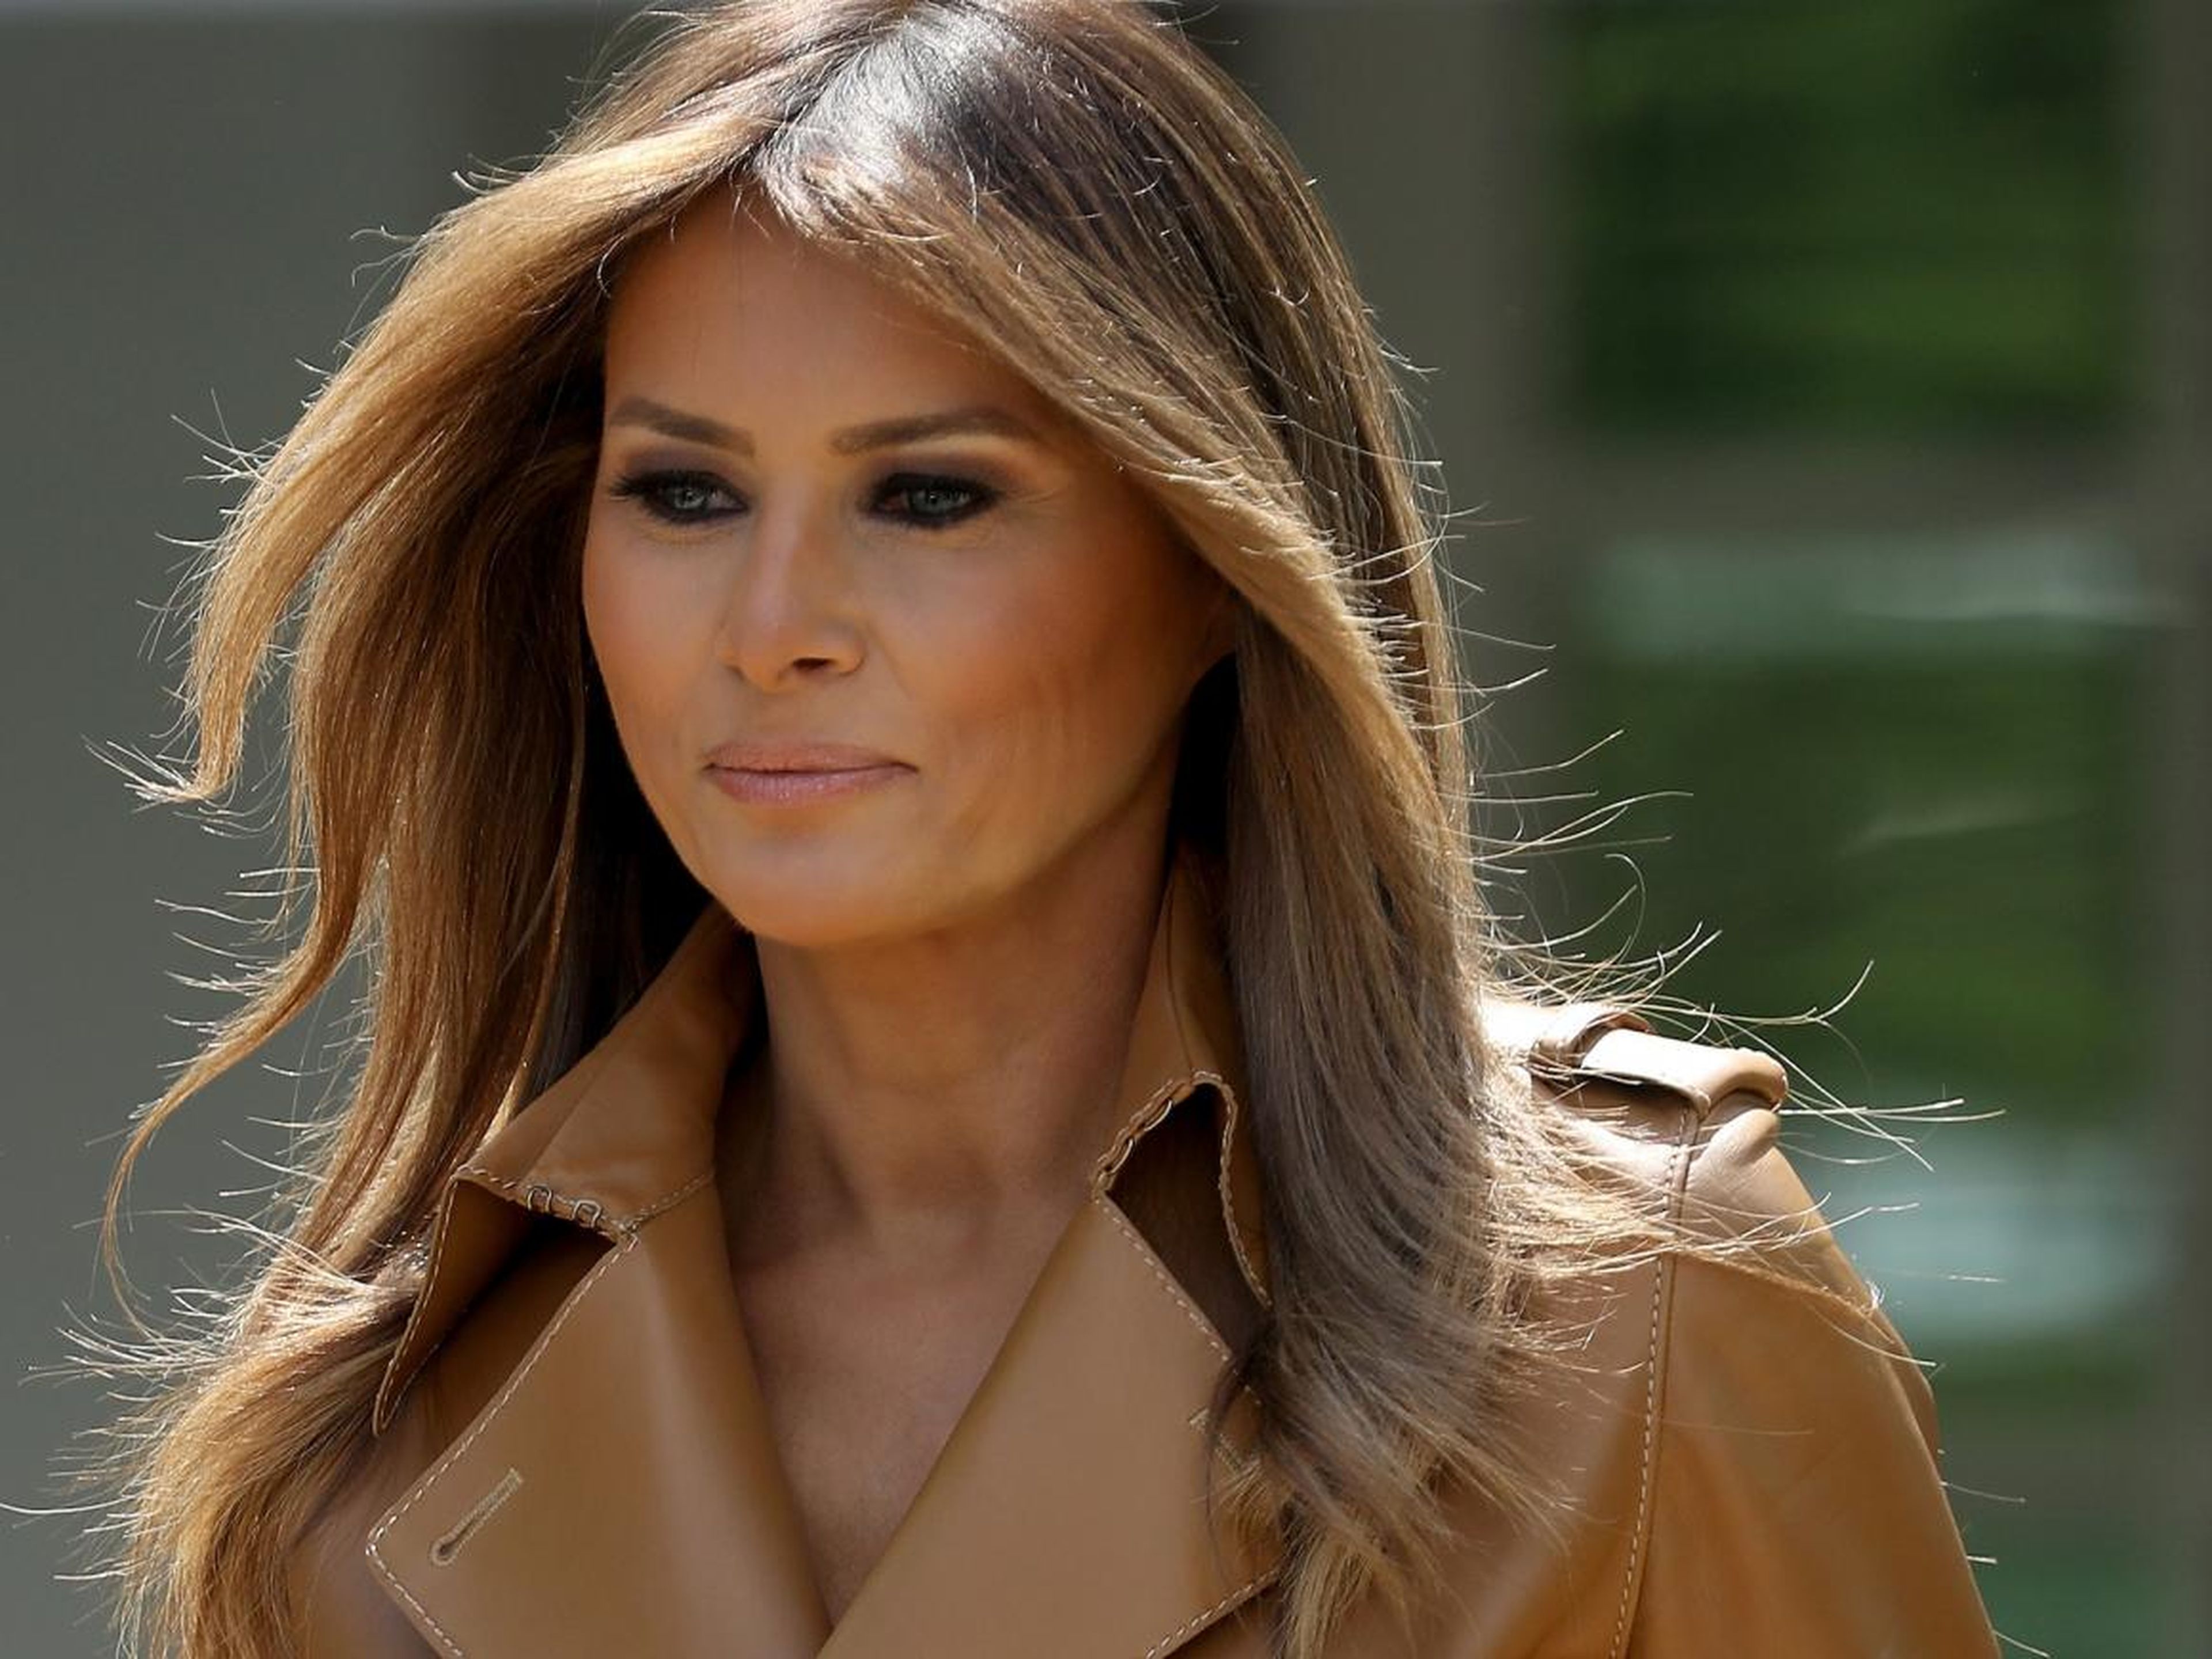 To complete her look, Melania has her own makeup artist, Nicole Bryl, who told US Weekly of Melania's plans to have a "glam room" in the White House. She also has a hairstylist who makes house calls and travels with her.